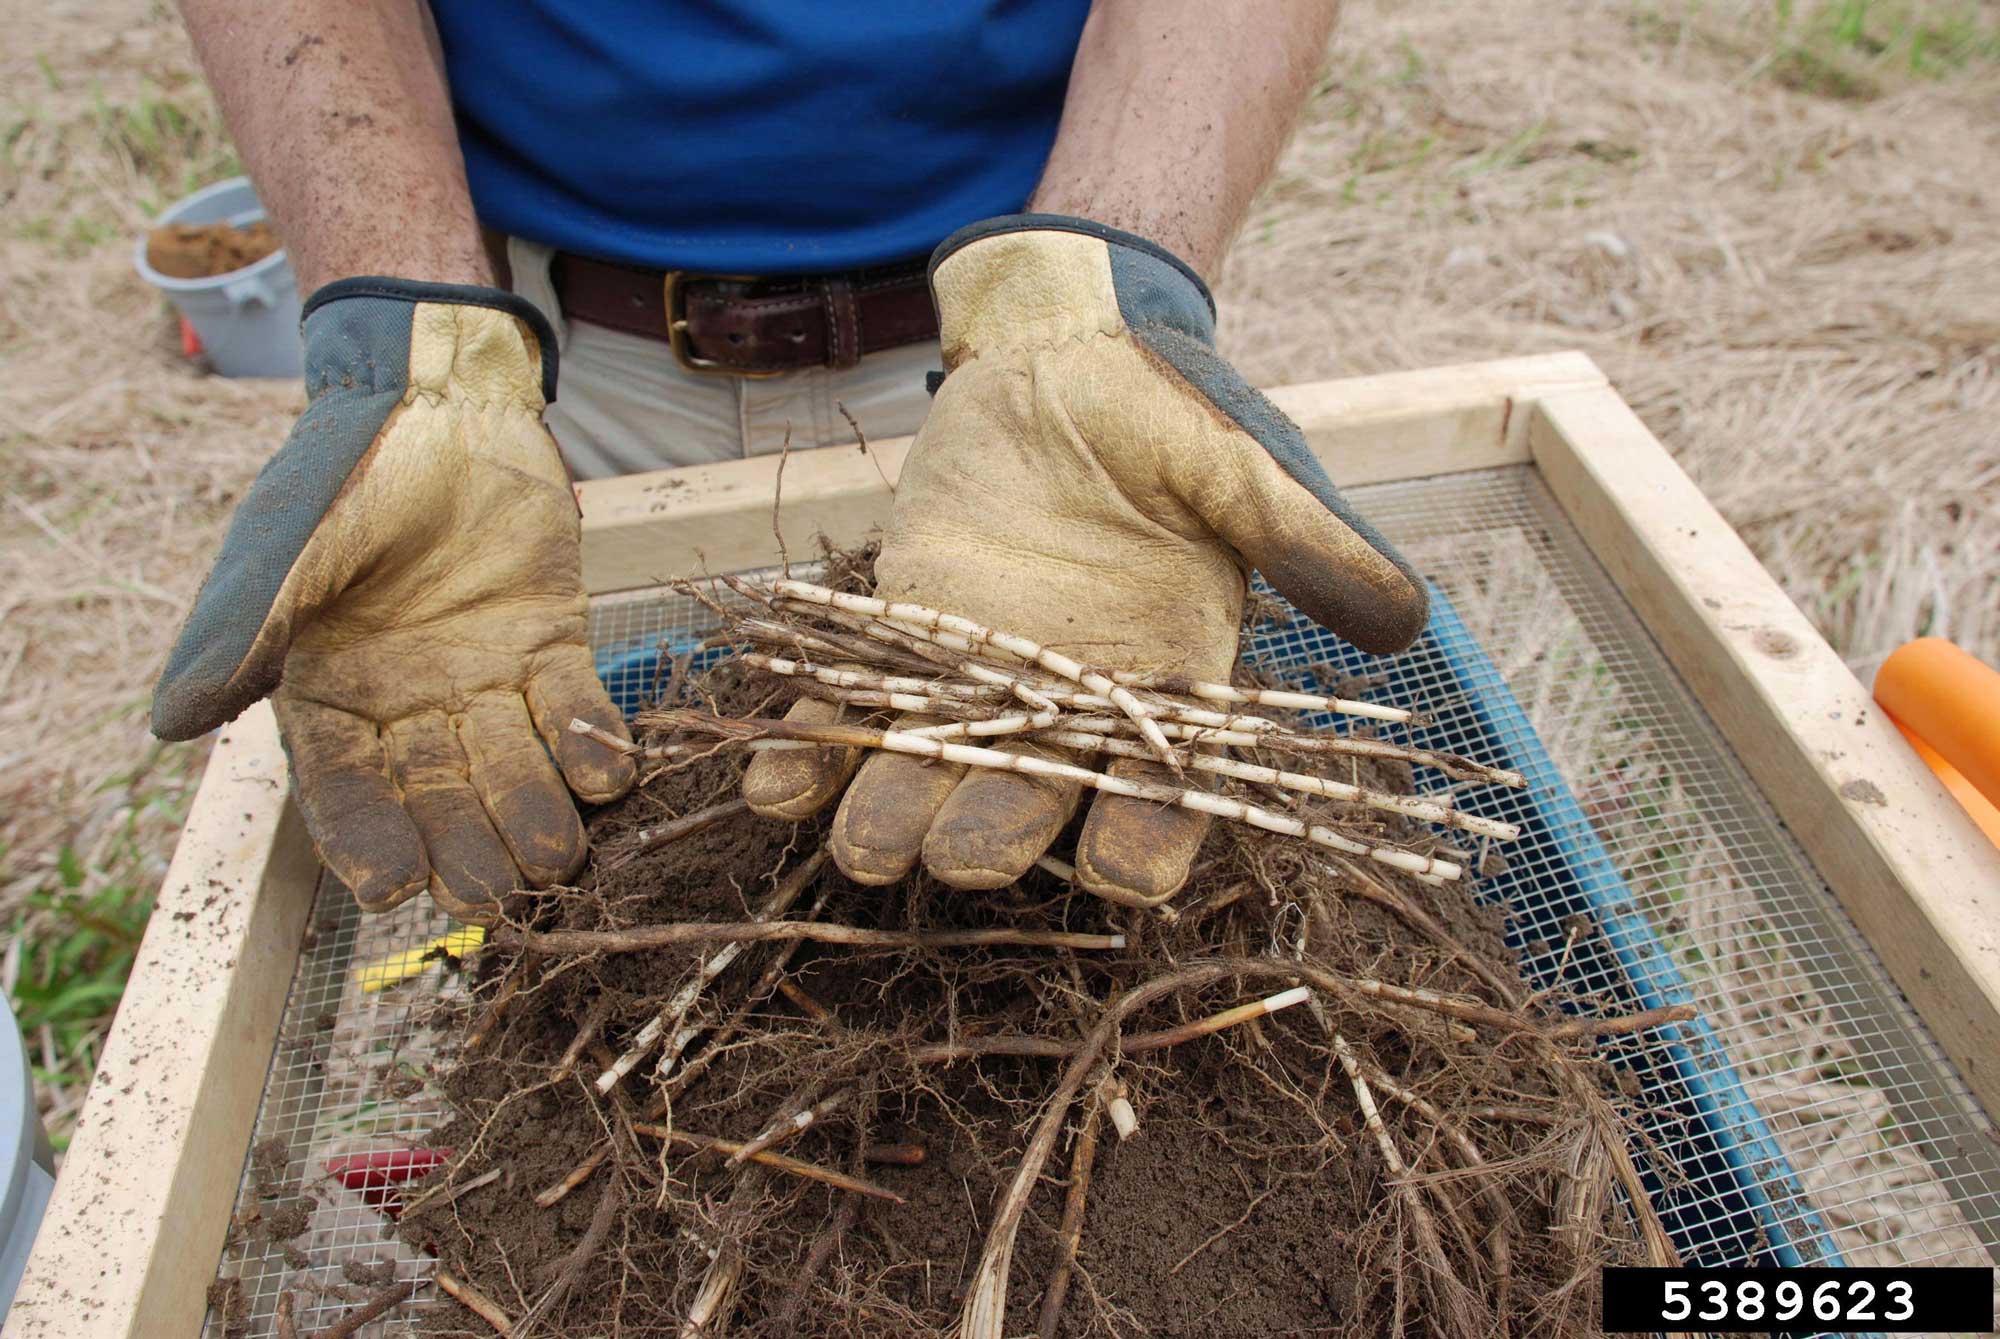 Photograph of a person holding segments of cogongrass rhizomes in a gloved hand. The rhizomes are straight and off-white with prominent nodes. The rhizomes are being held above a metal screen, which has apparently been used to sift them from the soil they were growing in.